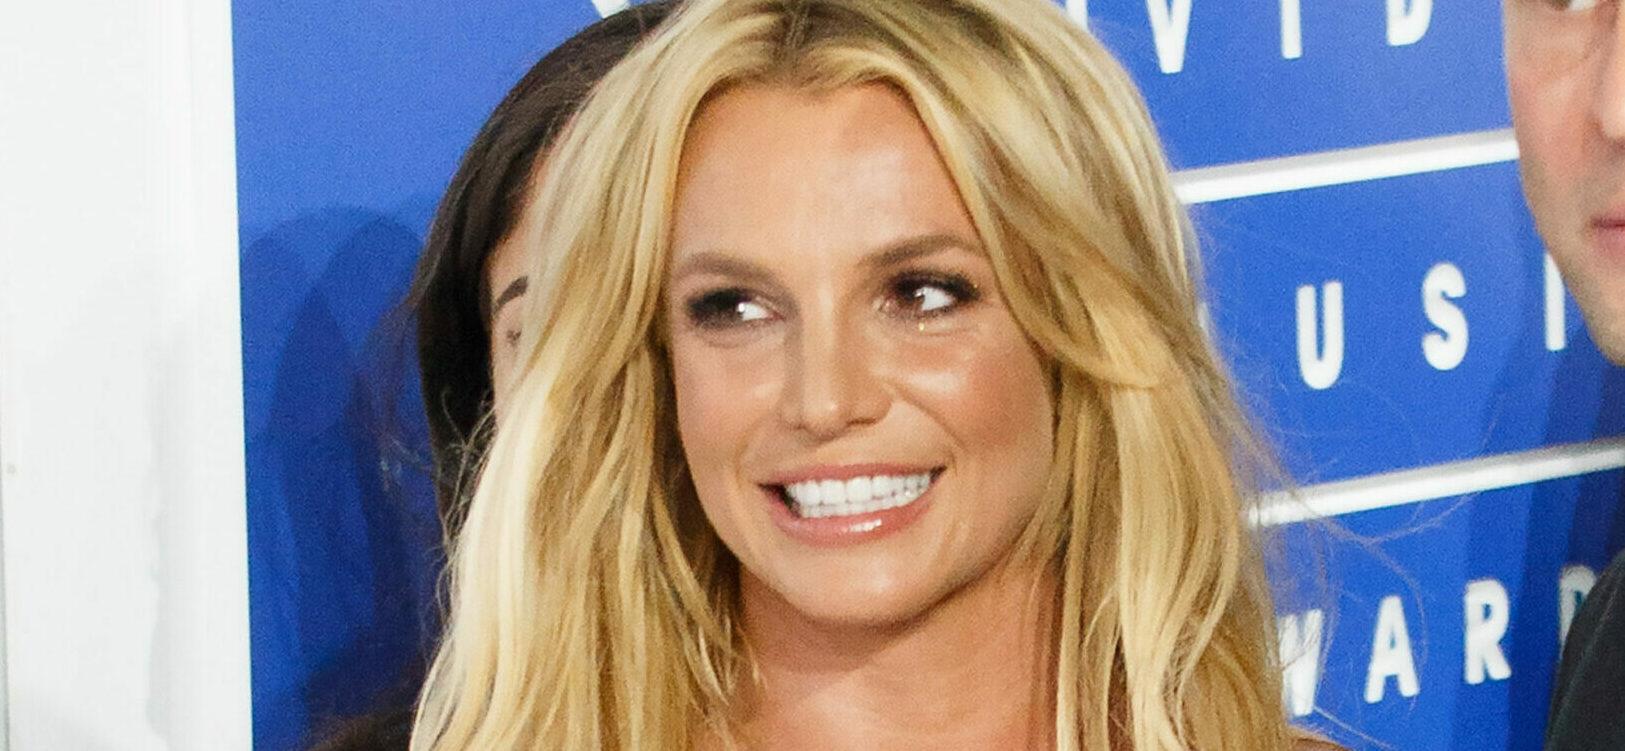 Britney Spears Praises Reese Witherspoon’s Book Recommendation: ‘Find Your Unicorn Space’